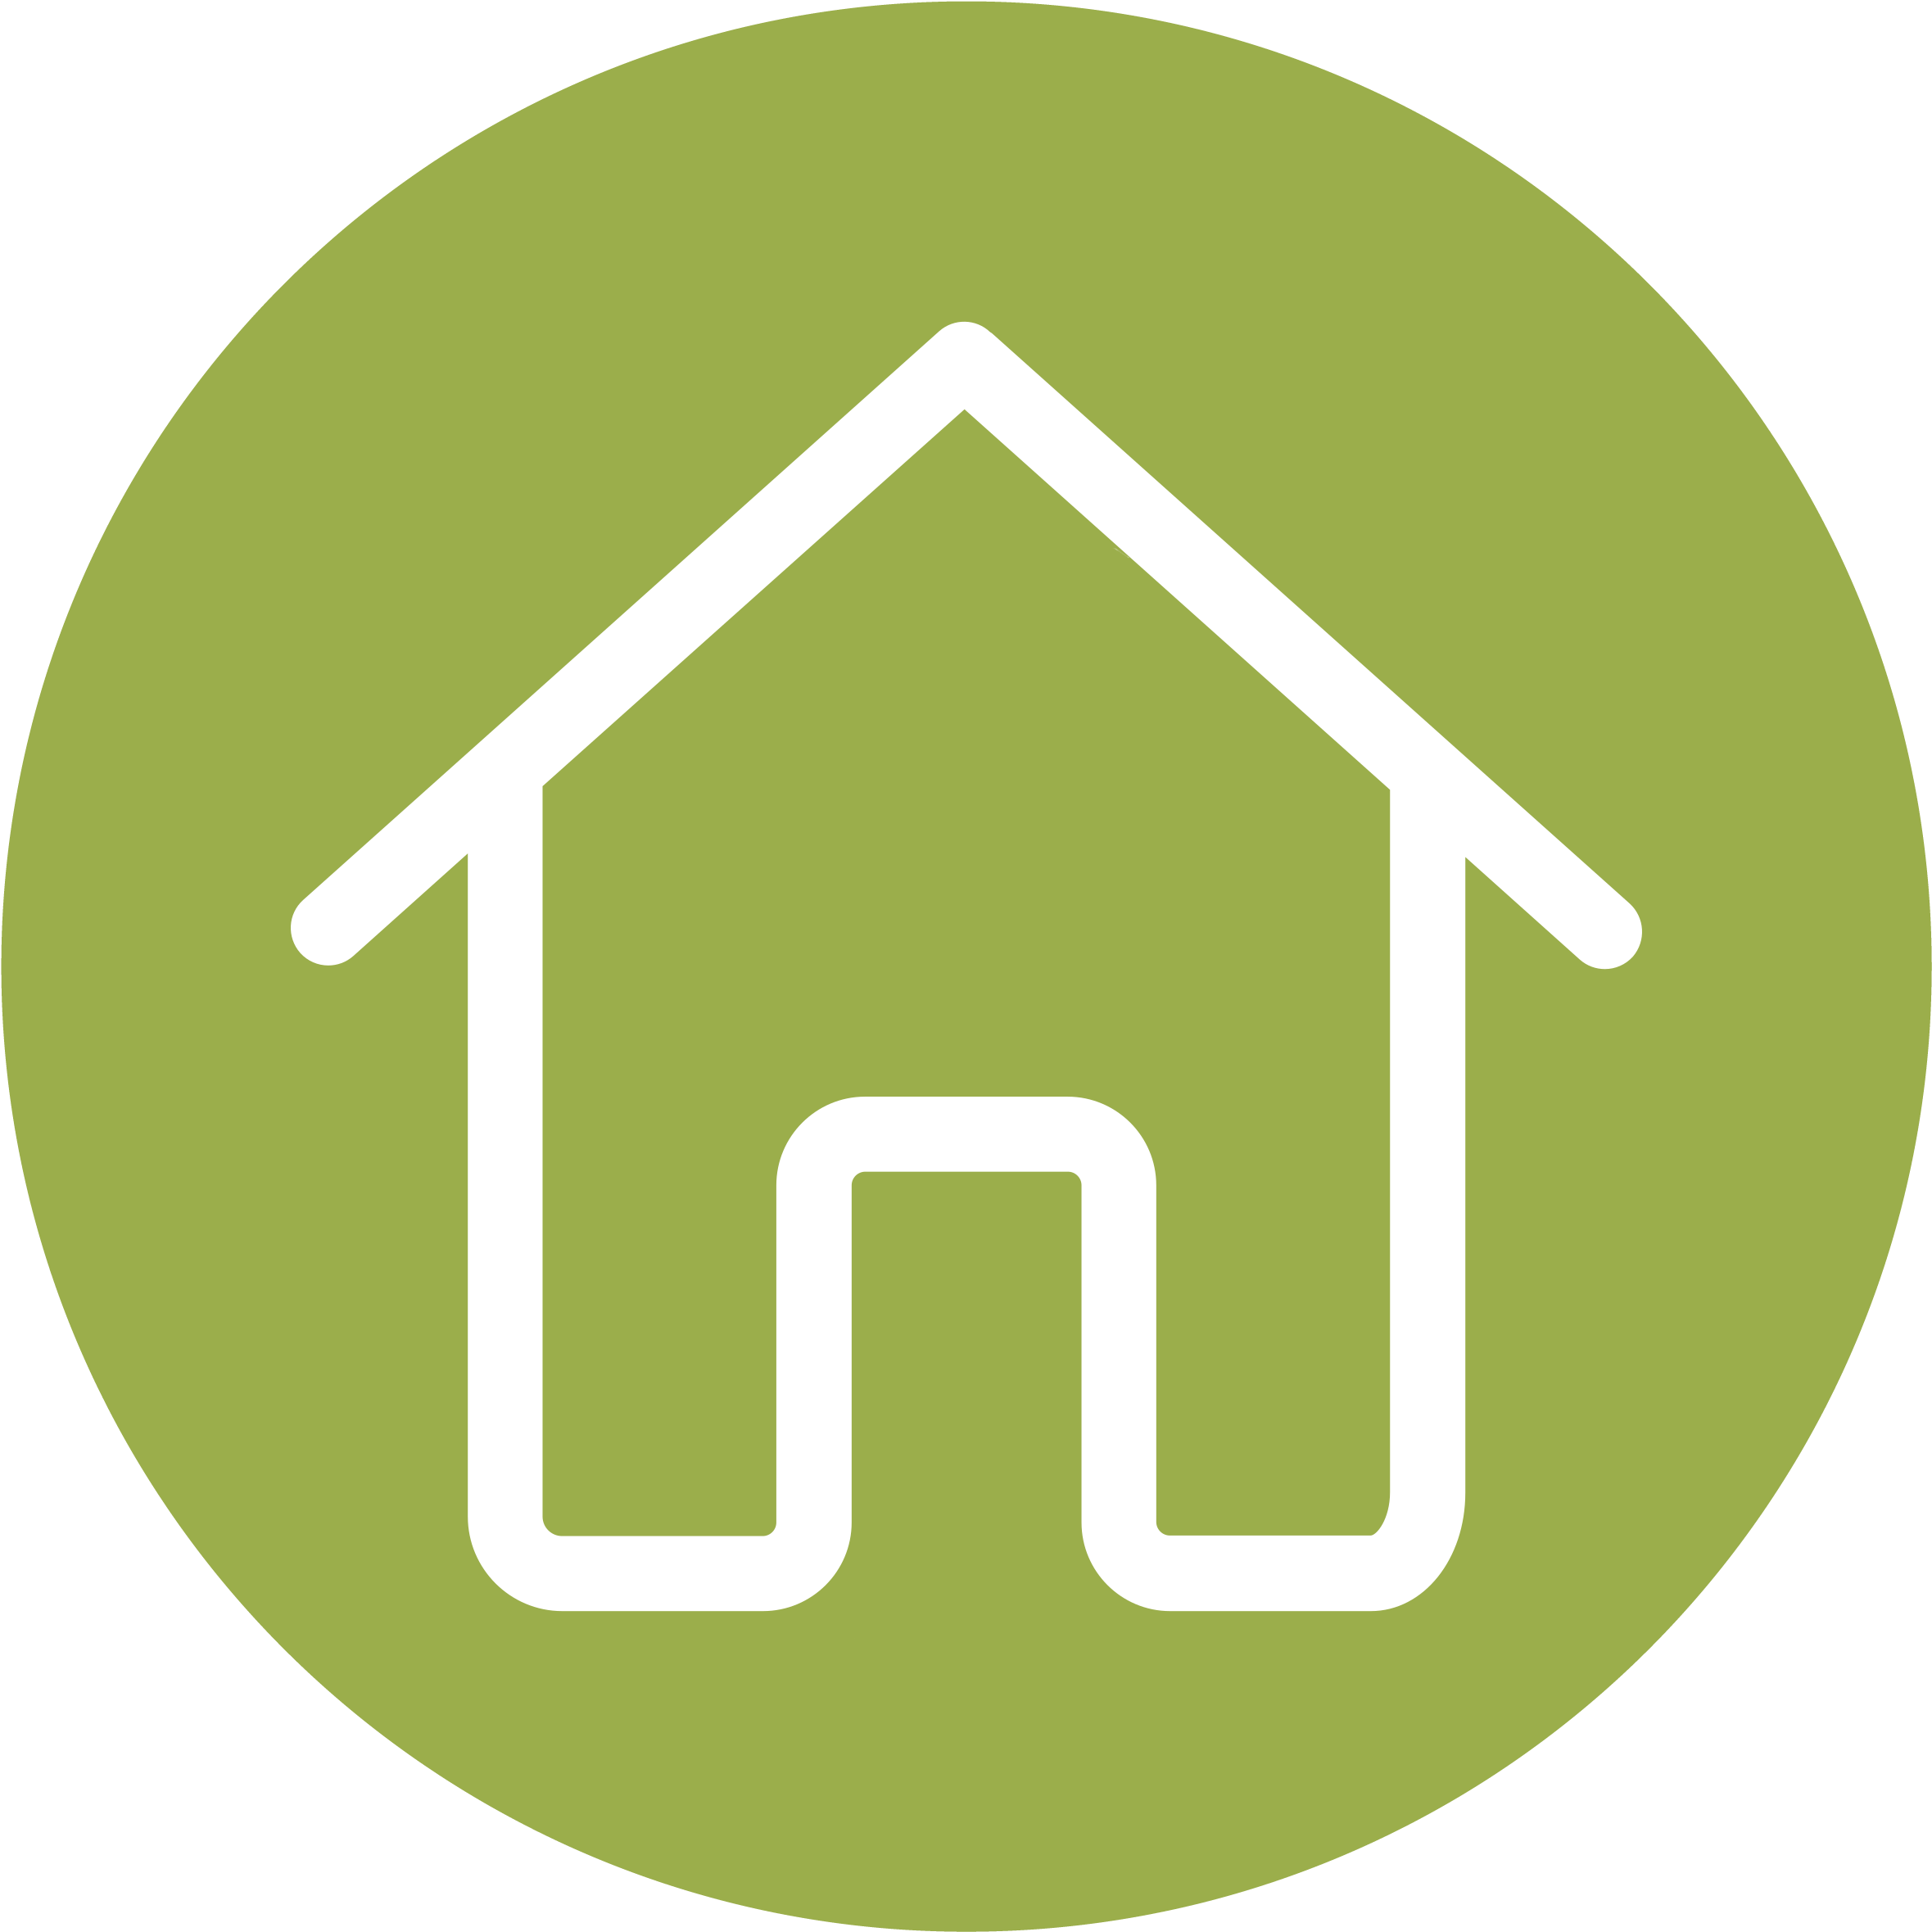 Home - Home Icon Images For Website (2486x2480)